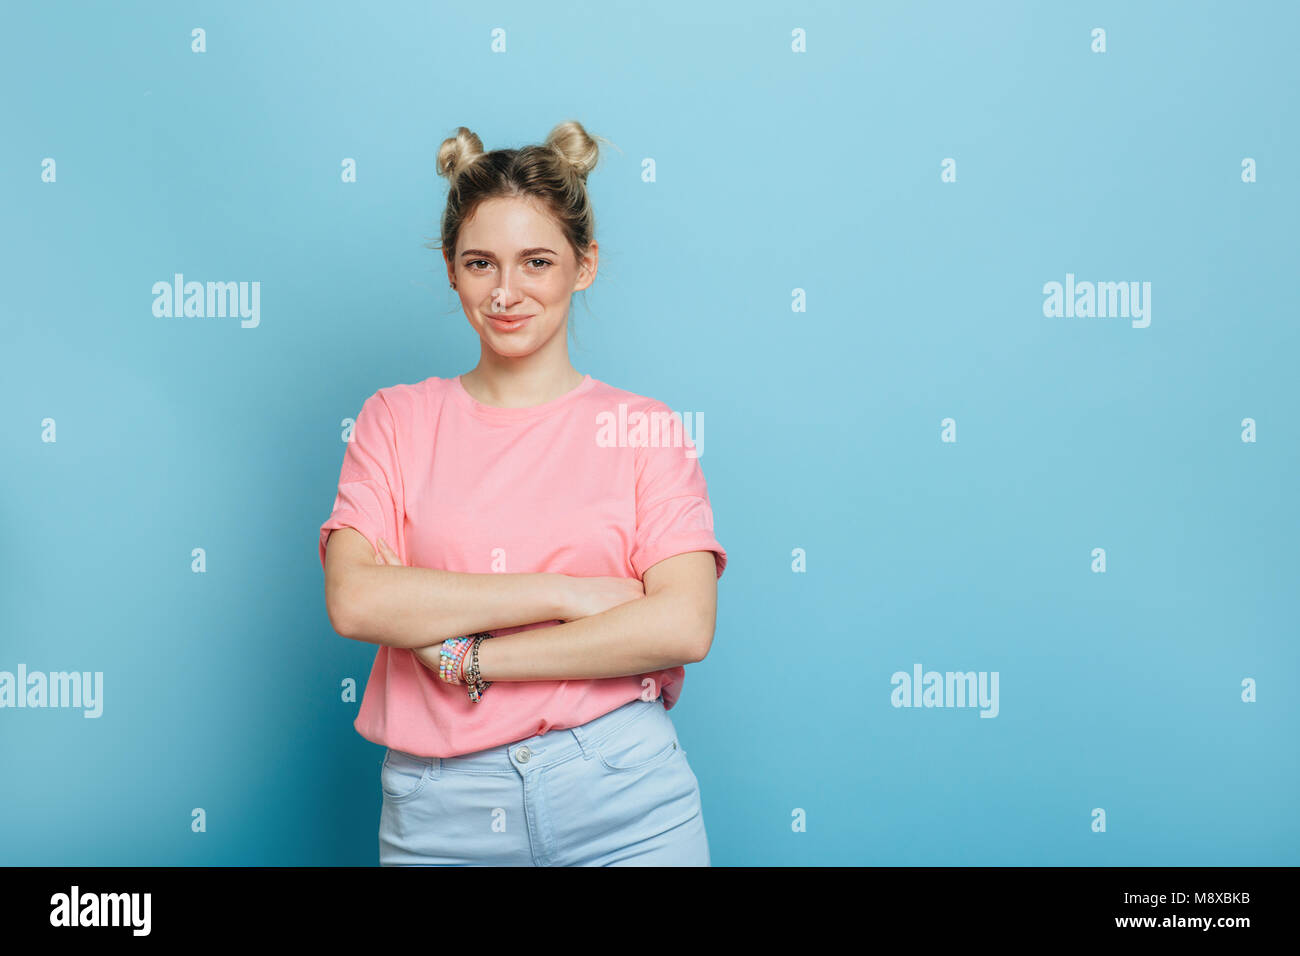 young woman in a pink t-shirt on a blue background Stock Photo